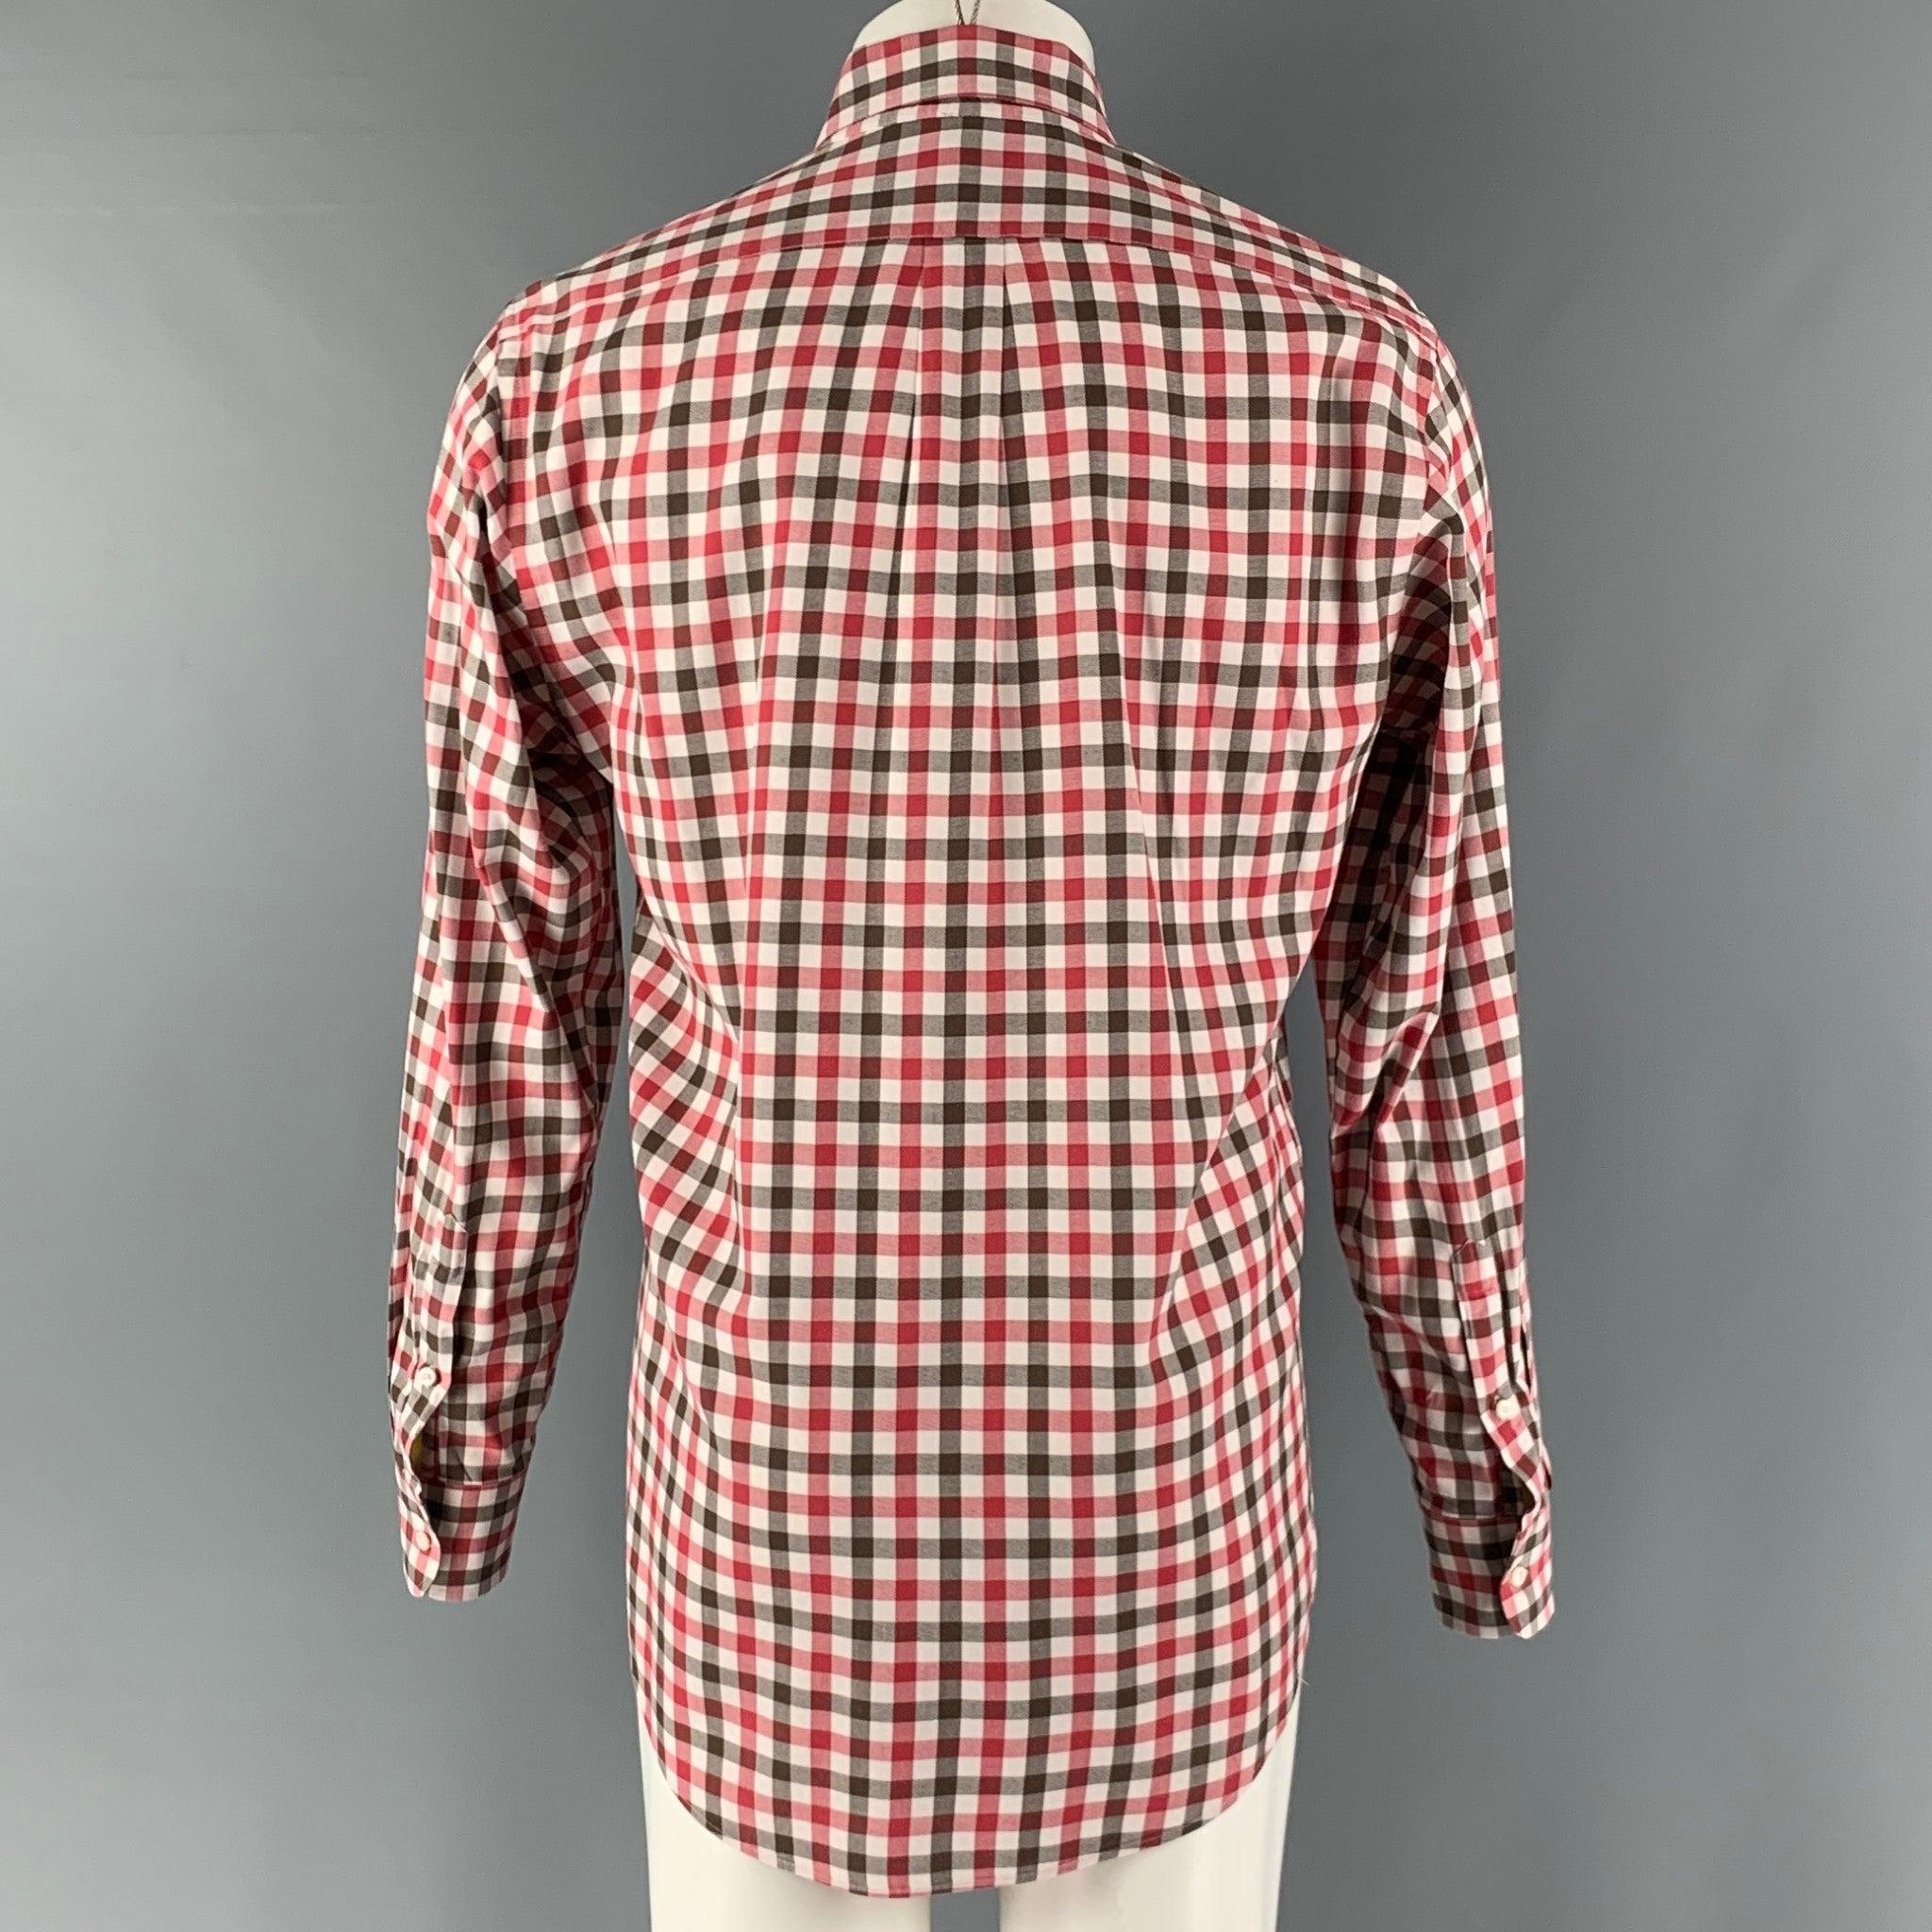 BERGDORF GOODMAN Size M Red White Brown Checkered Cotton Long Sleeve Shirt In Excellent Condition For Sale In San Francisco, CA